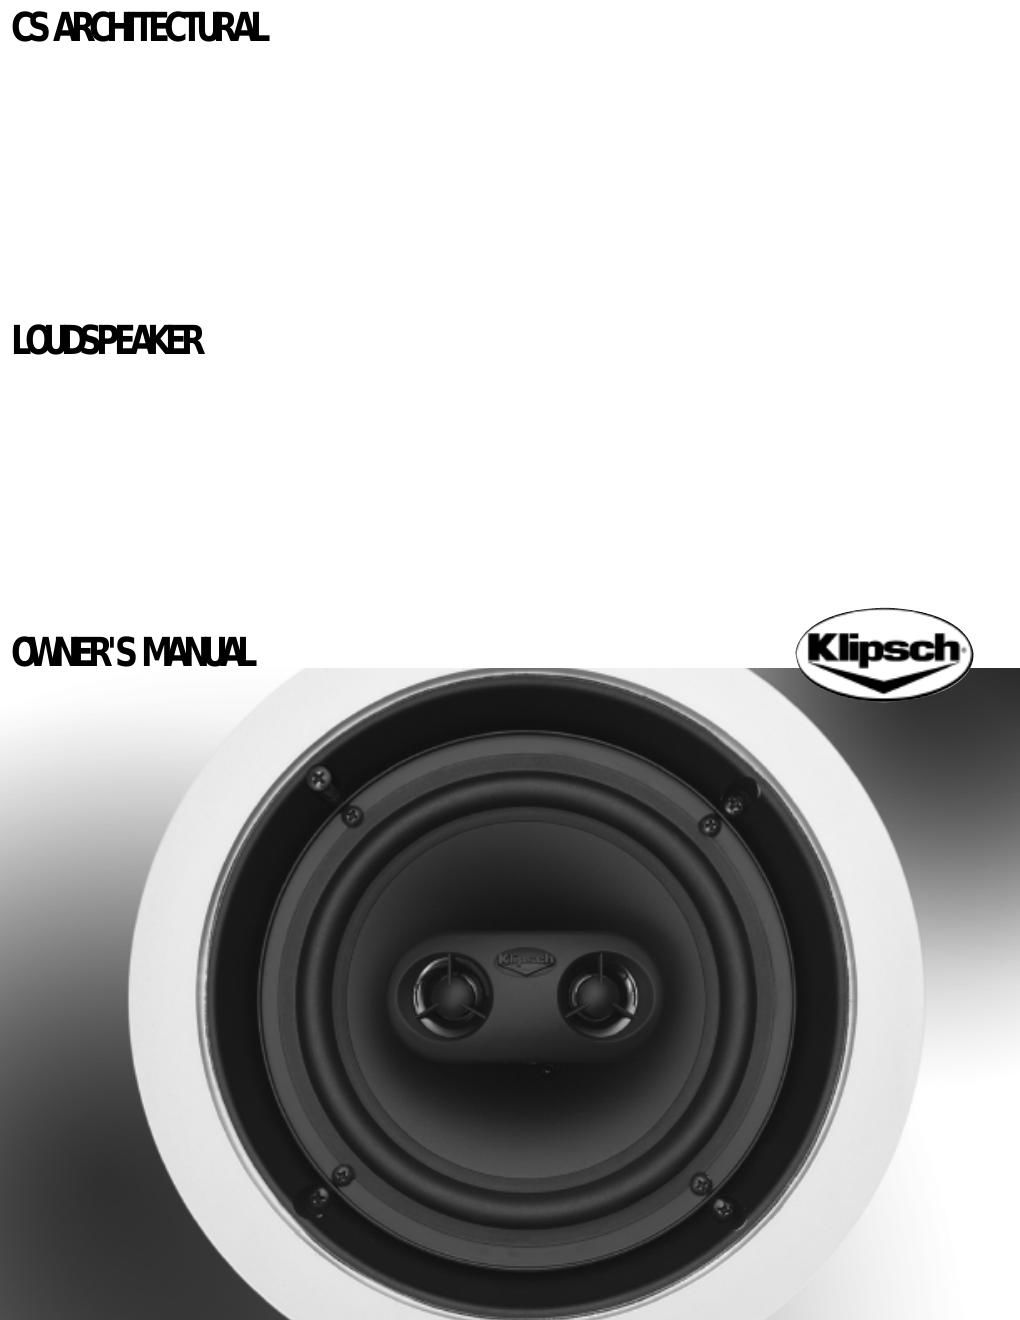 klipsch cs architectural owners manual